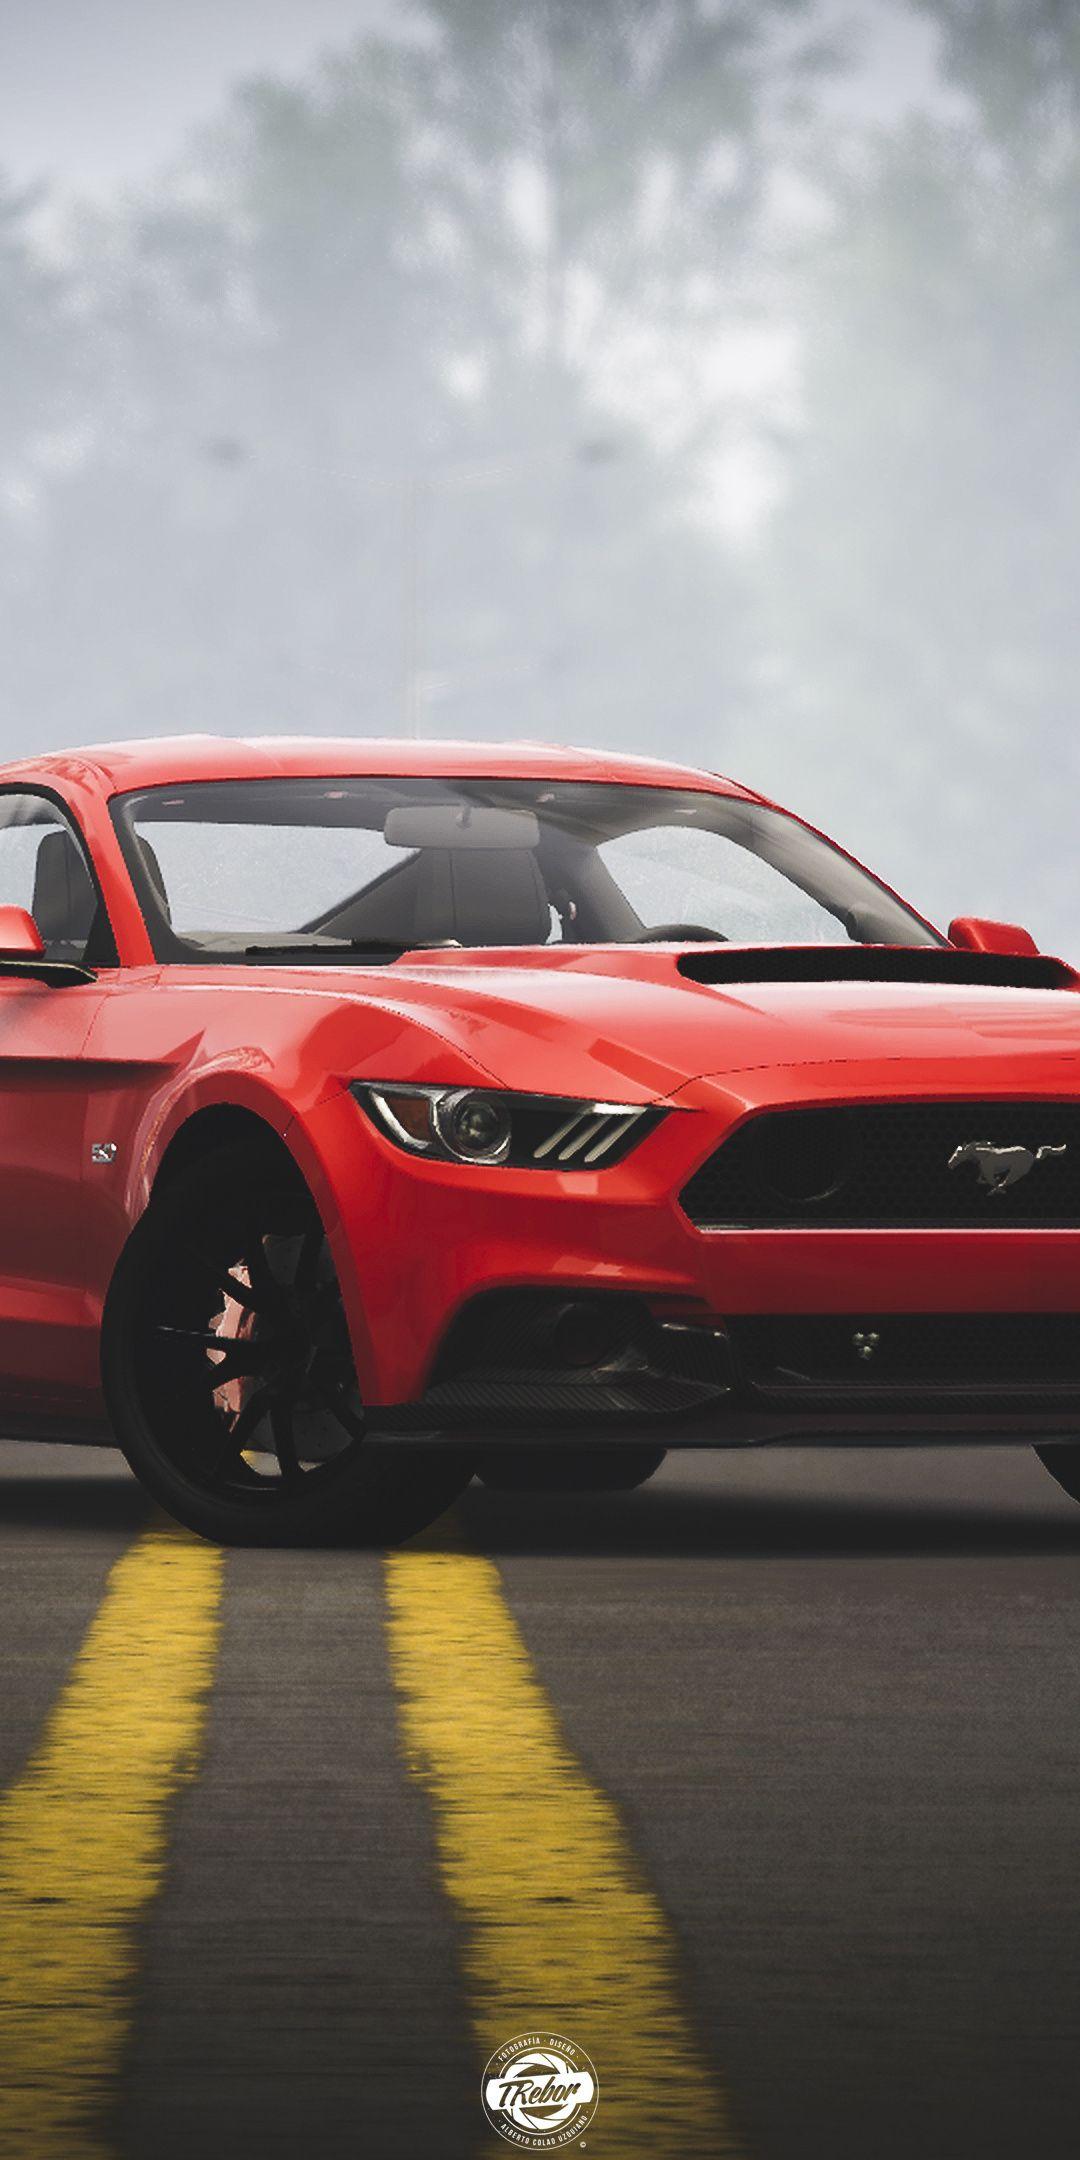 Ford Mustang Hd Wallpaper For Mobile